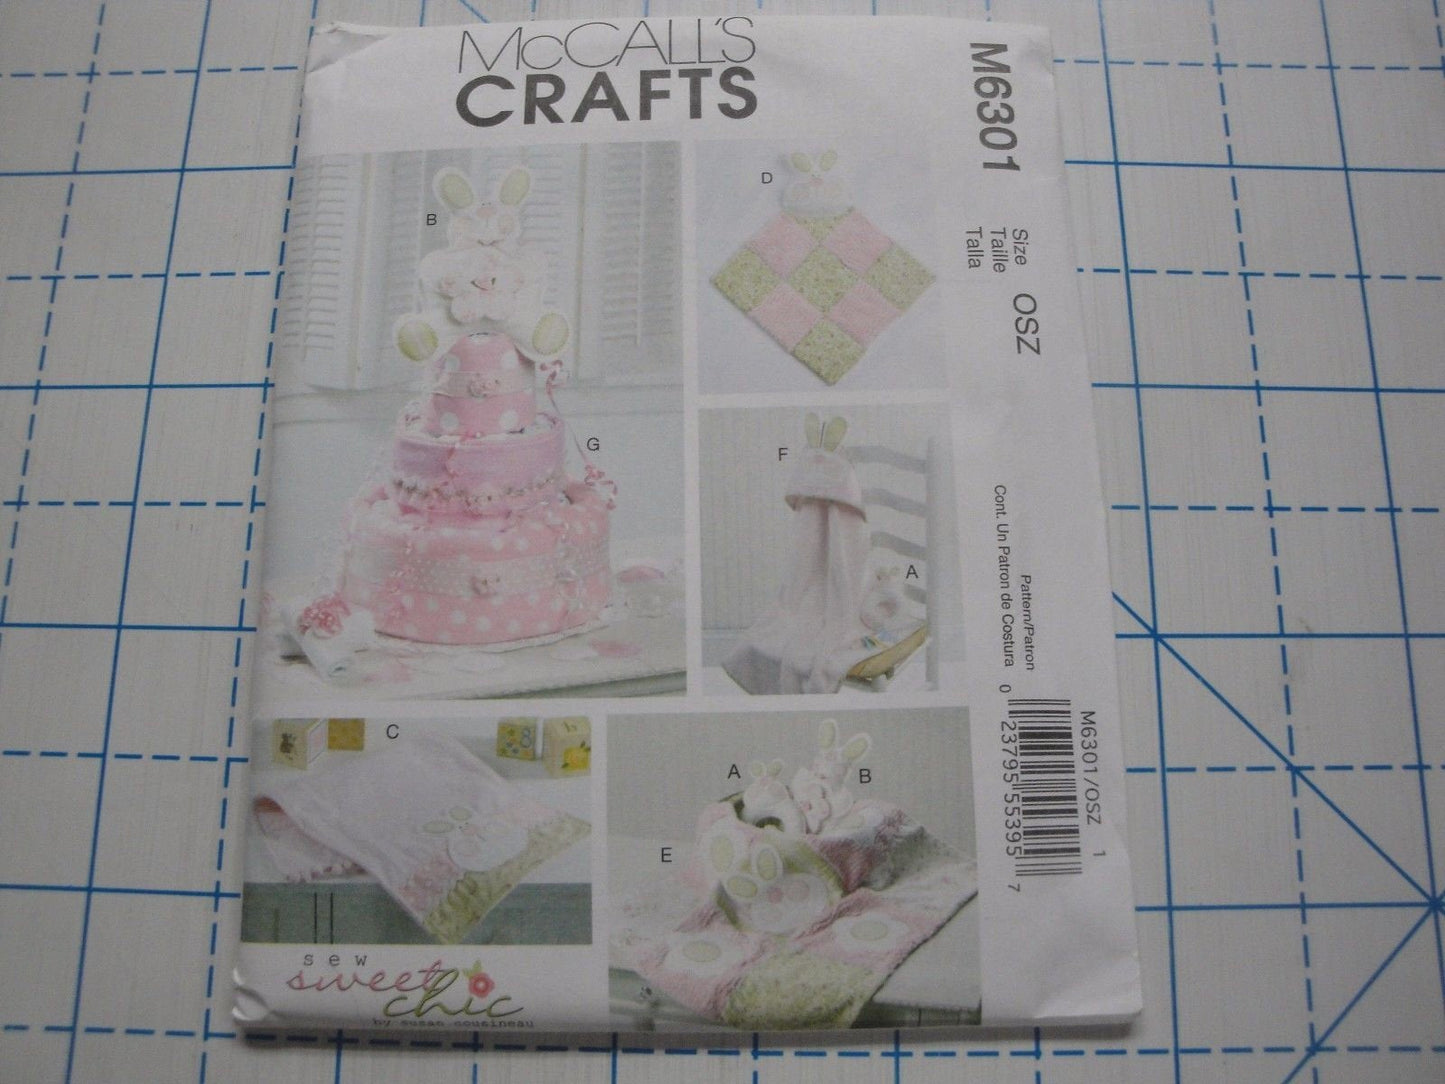 McCall's Crafts Pattern #M6301 "Baby Accessories"